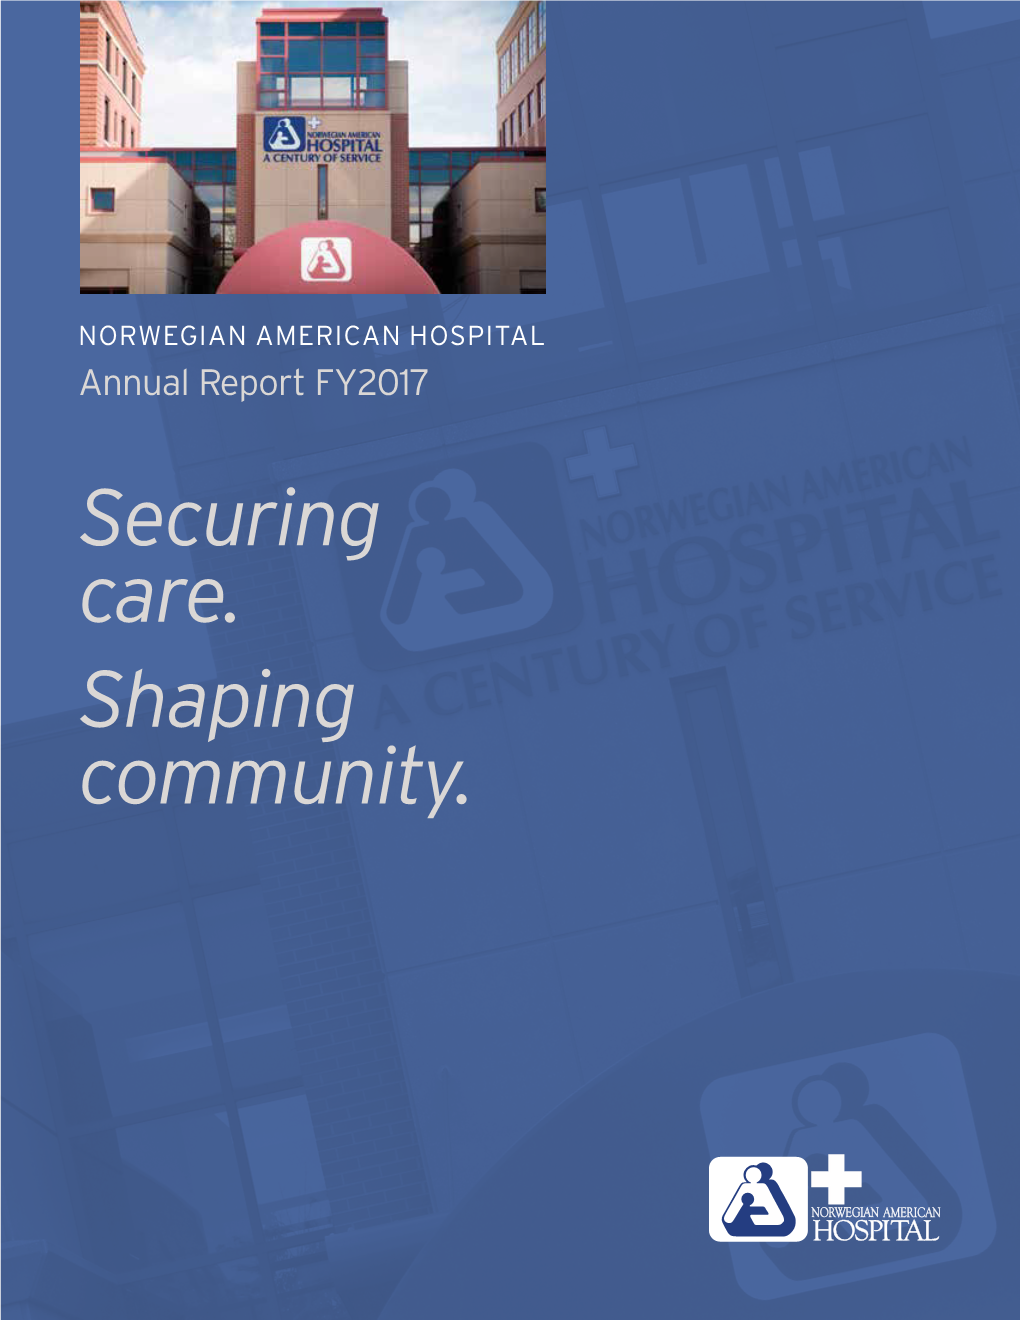 Annual Report FY2017 Securing Care